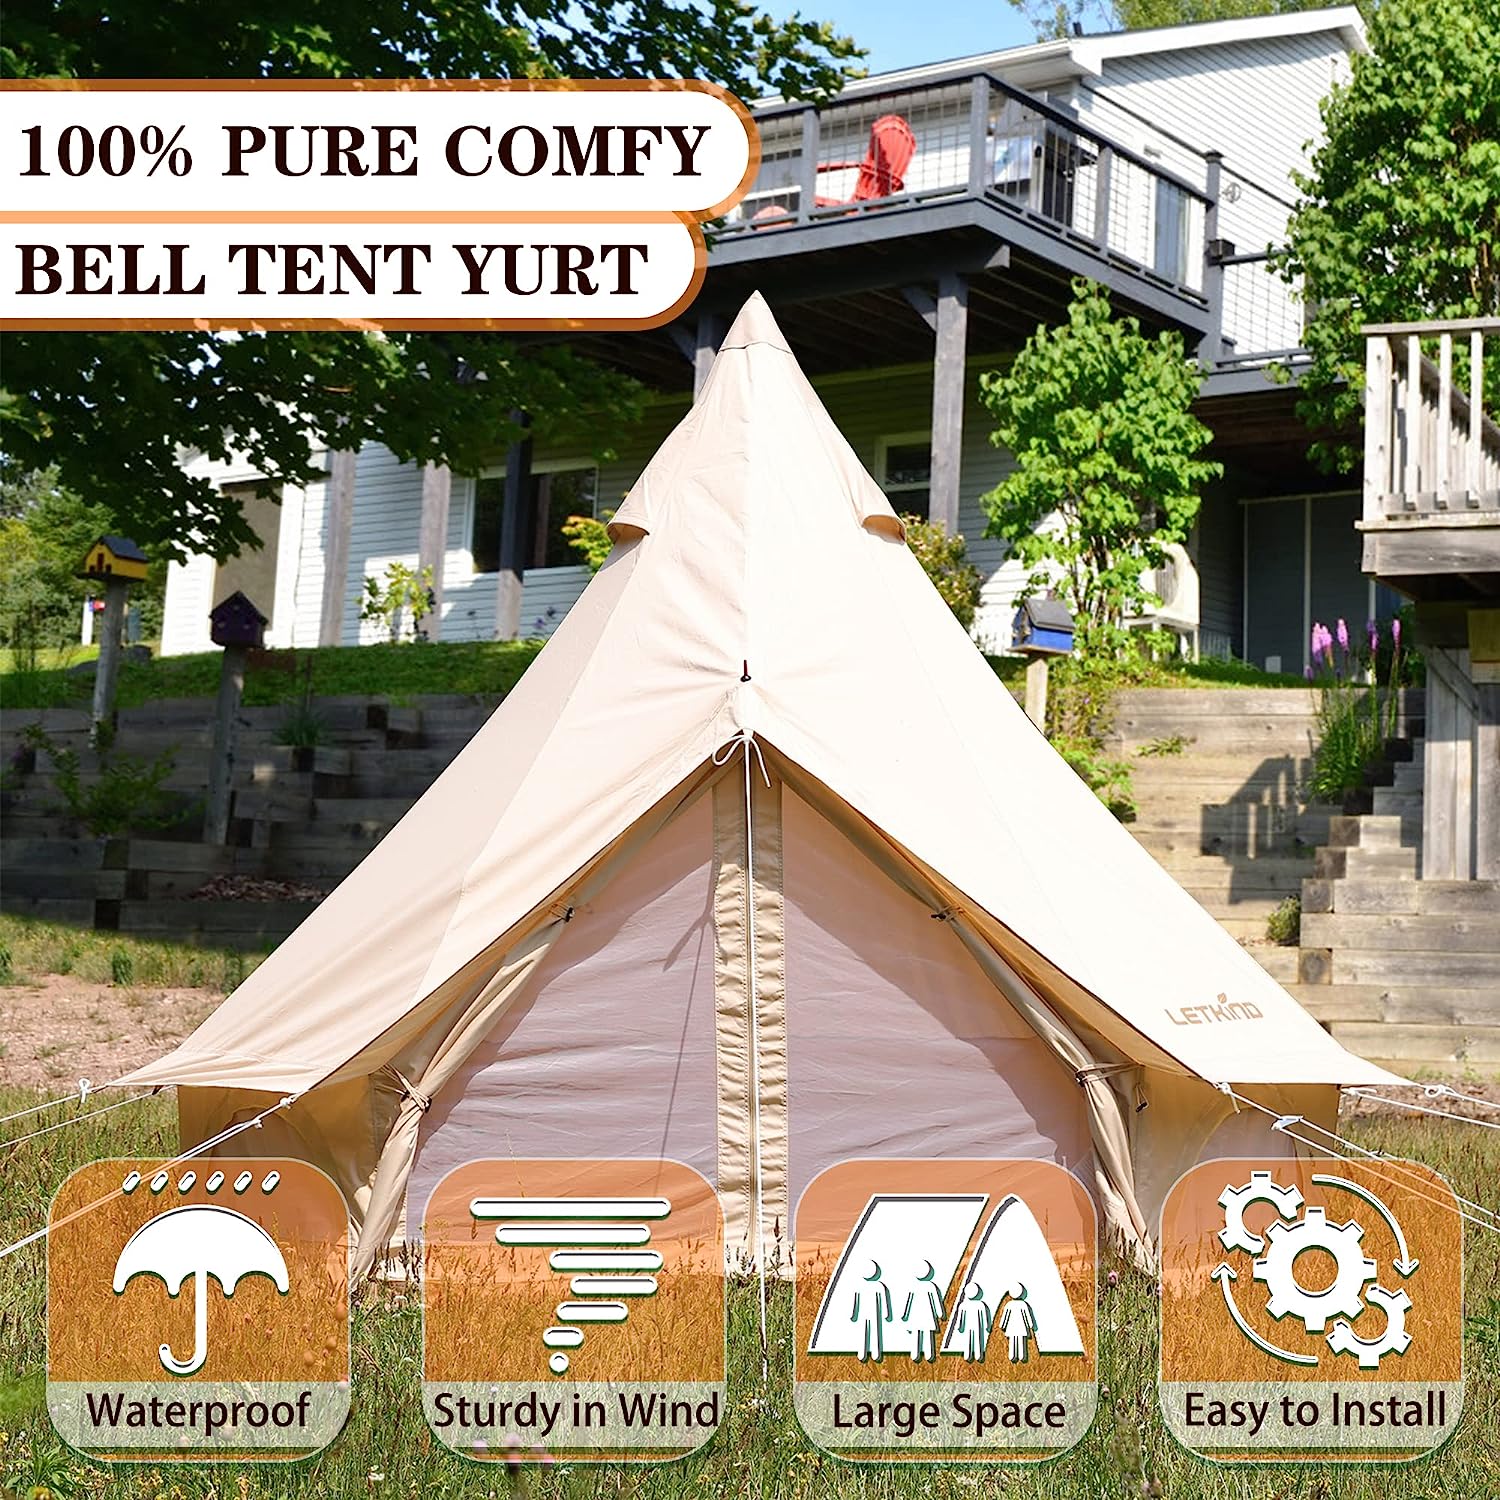 Letkind Bell Tent For Glamping Materials